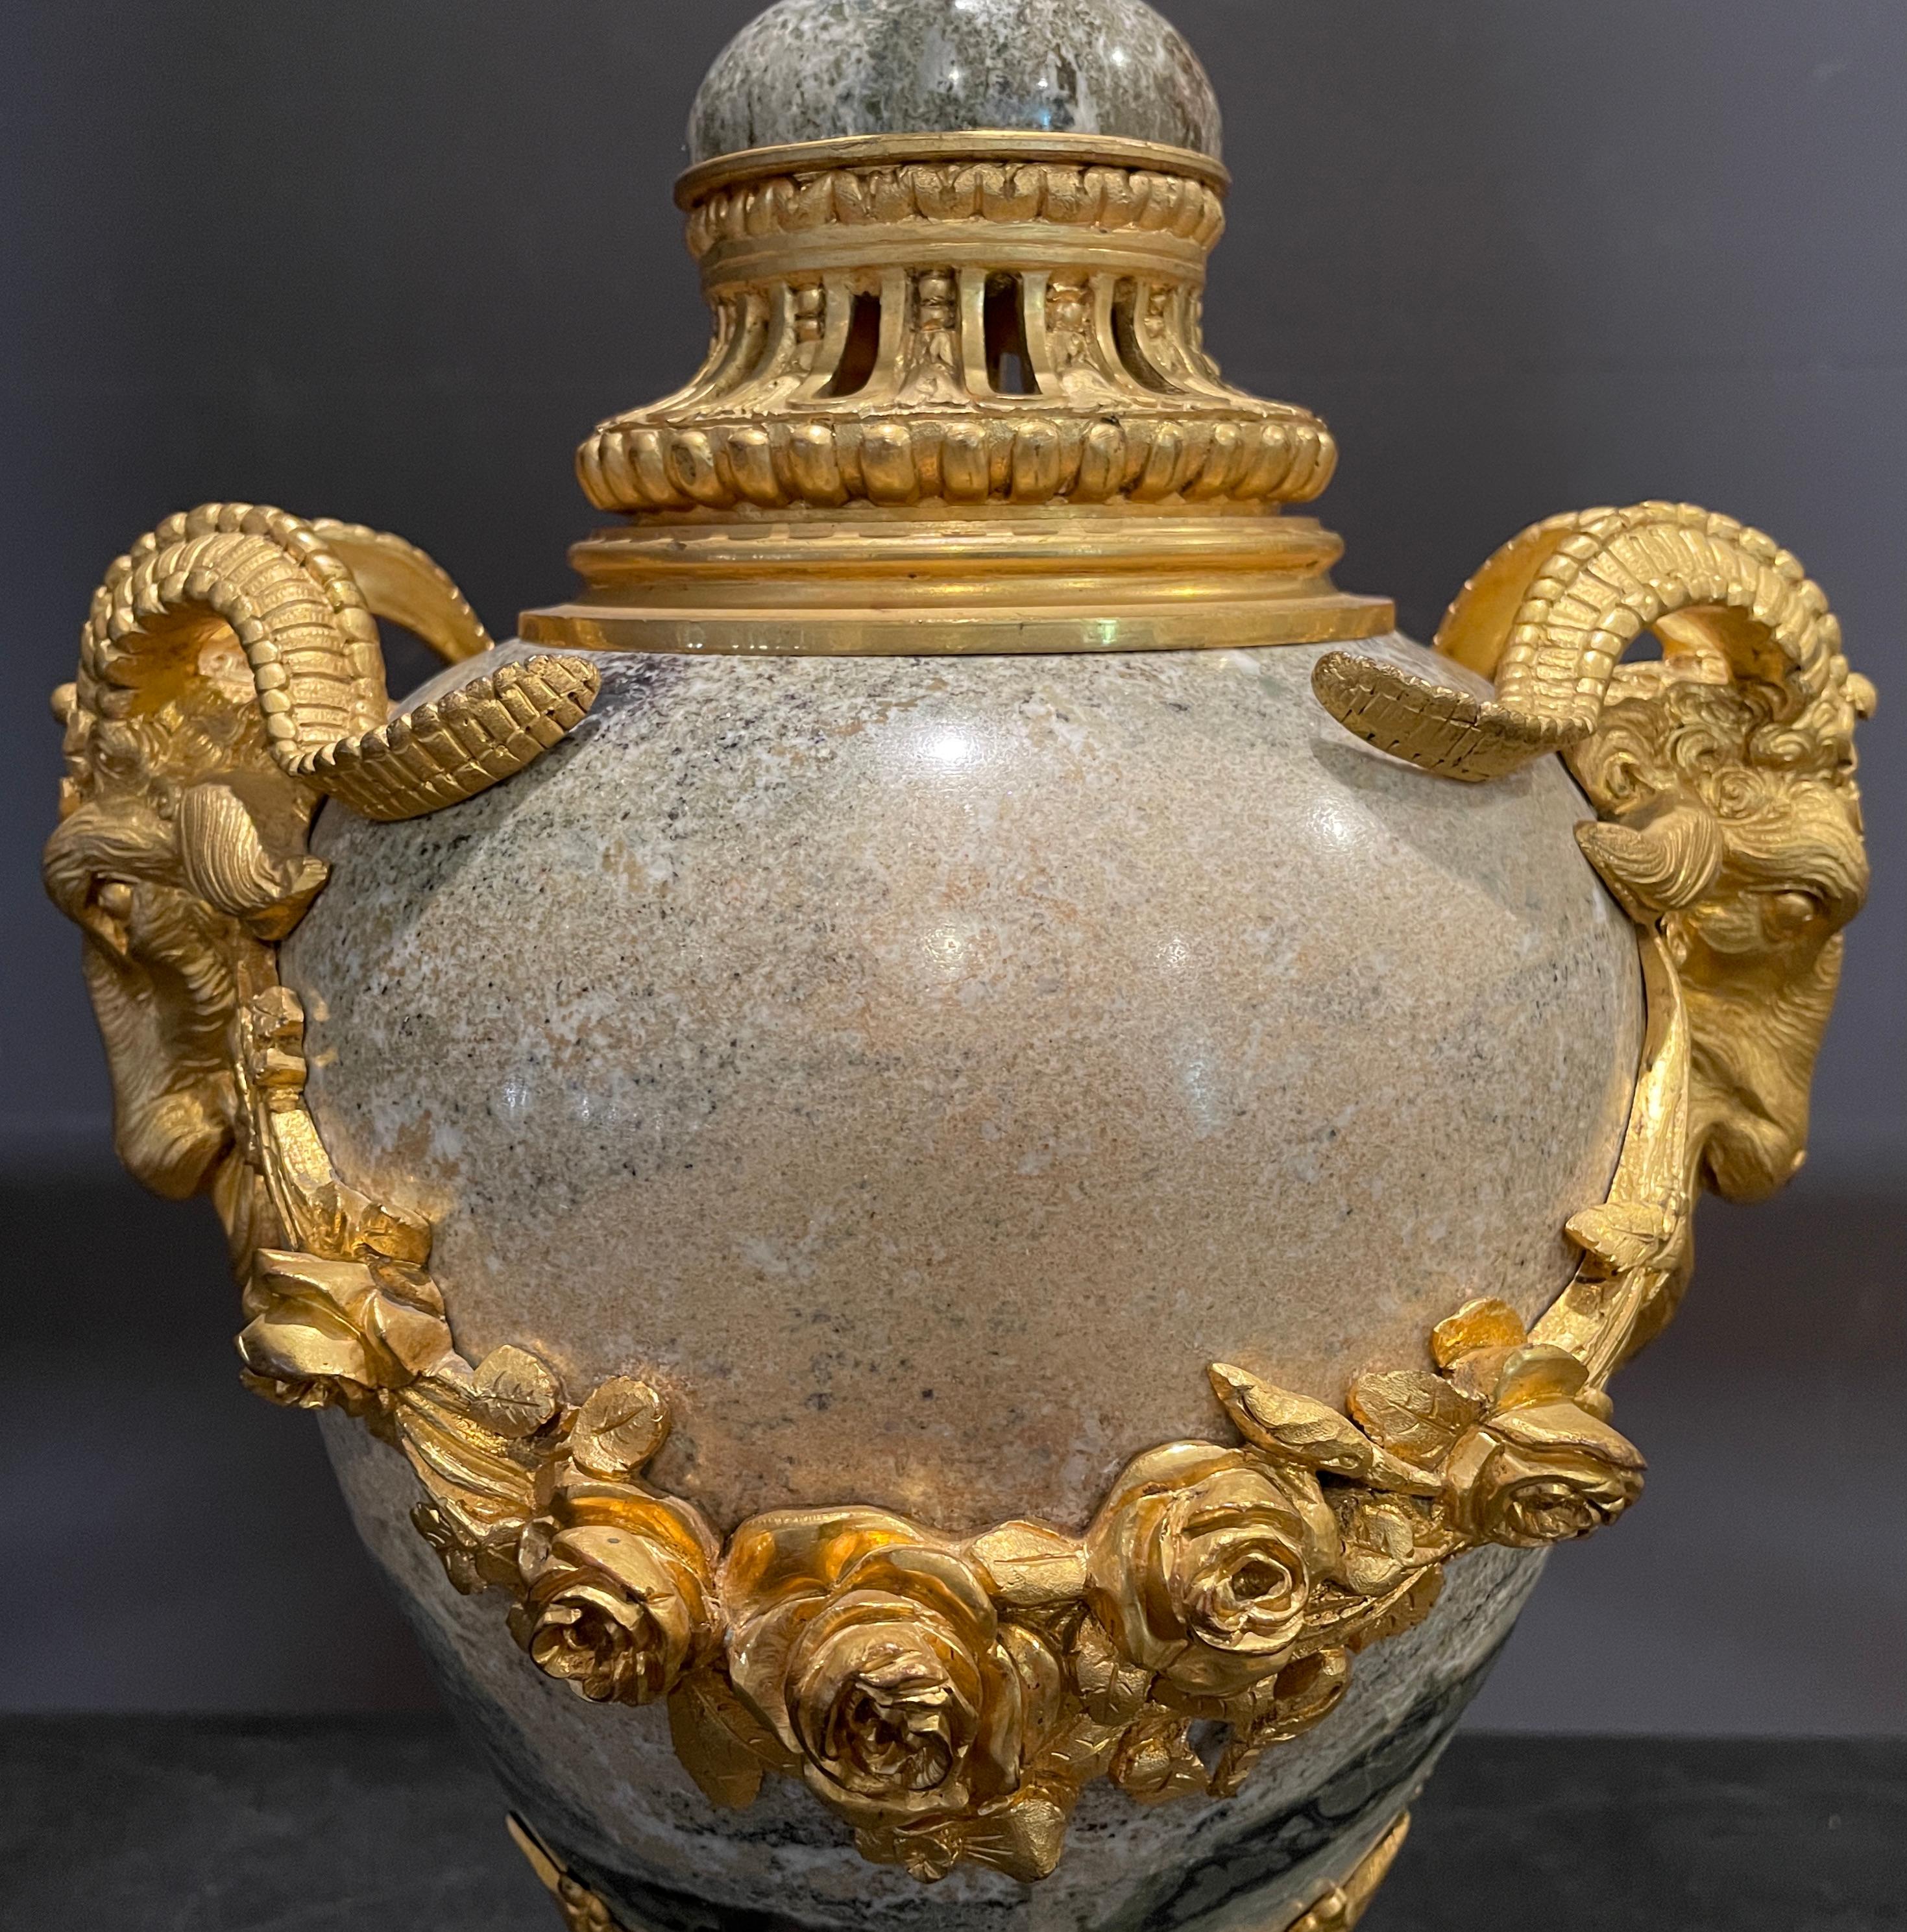 19th century Louis XVI gilt bronze mounted marble lamp with rams head and rose swag details.
19